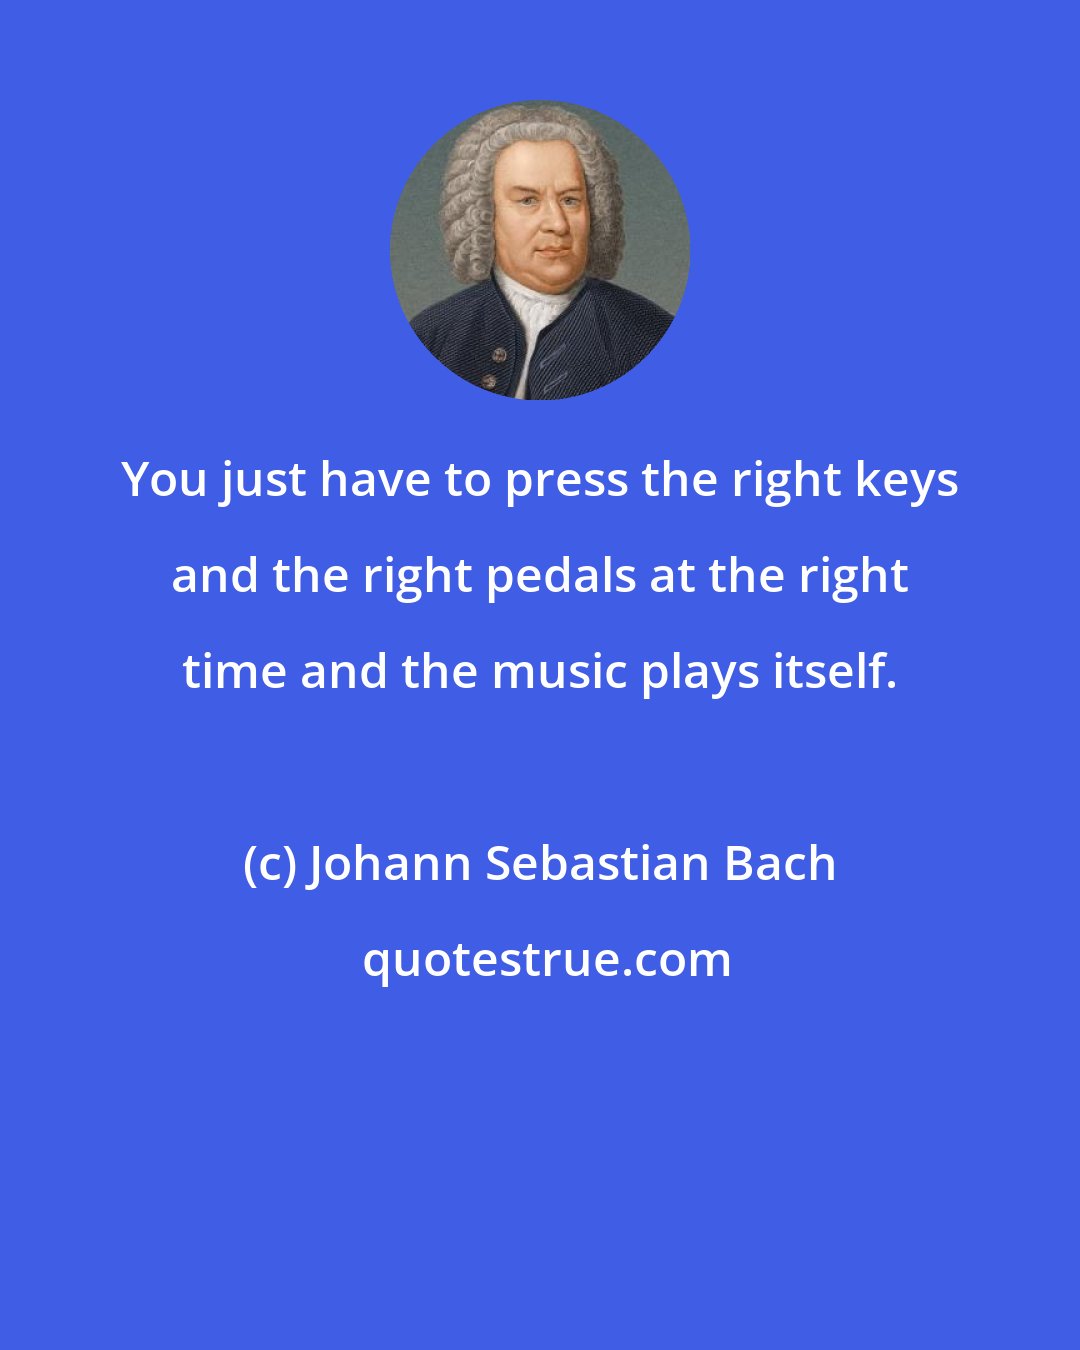 Johann Sebastian Bach: You just have to press the right keys and the right pedals at the right time and the music plays itself.